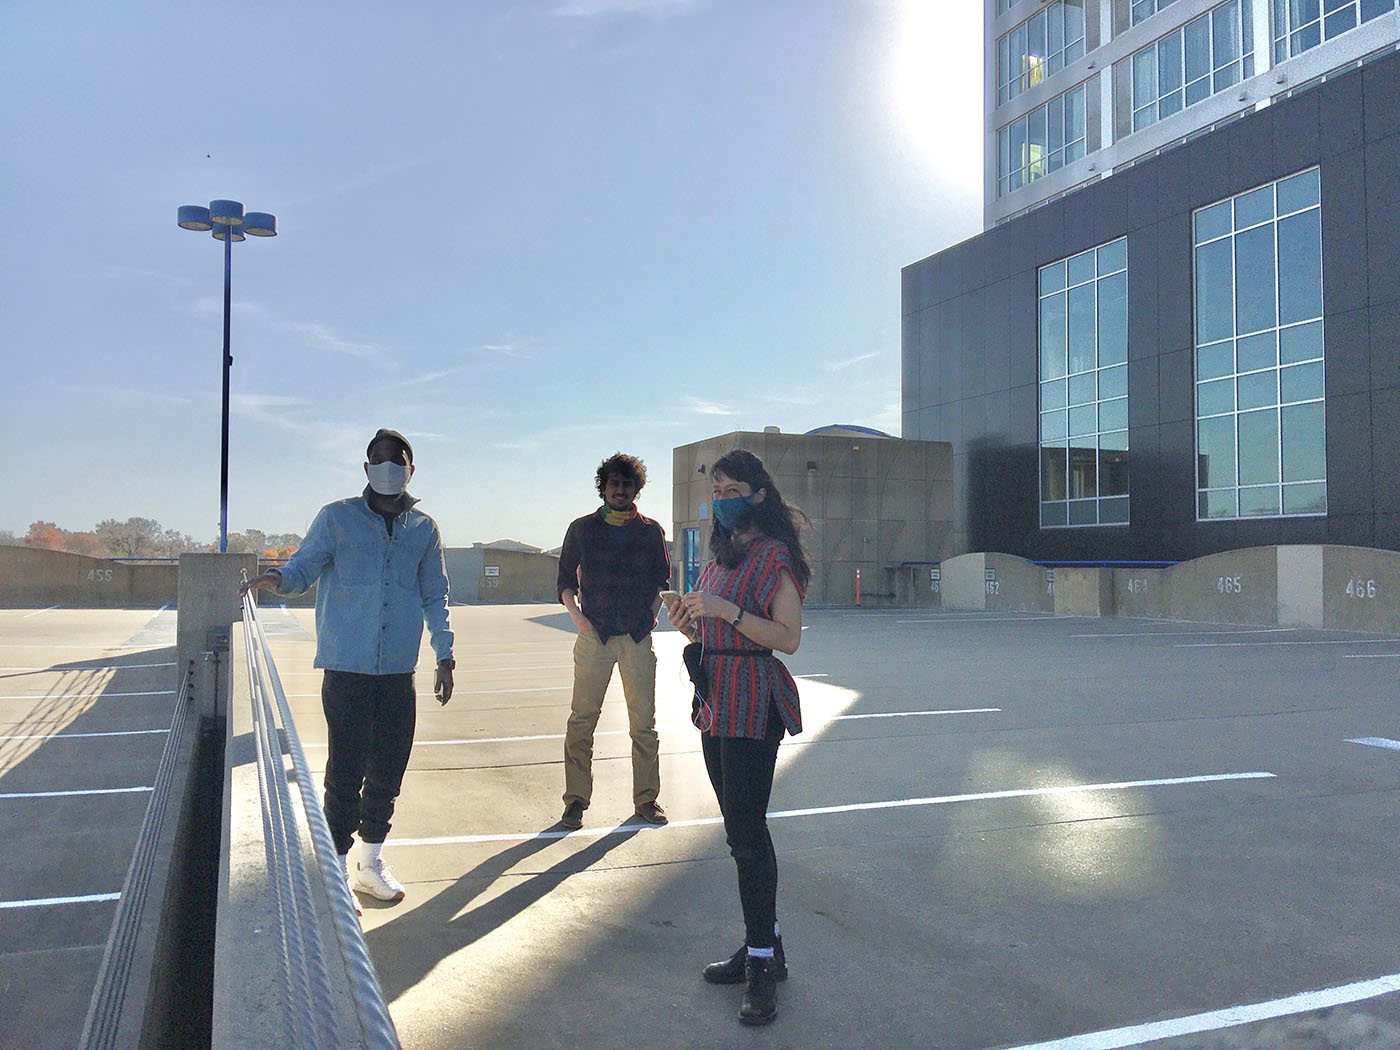 Pictured from left to right: Steven, Ramin, and Stephanie standing on the roof of the Chauncey Swan Parking Ramp located in Iowa City, Iowa.